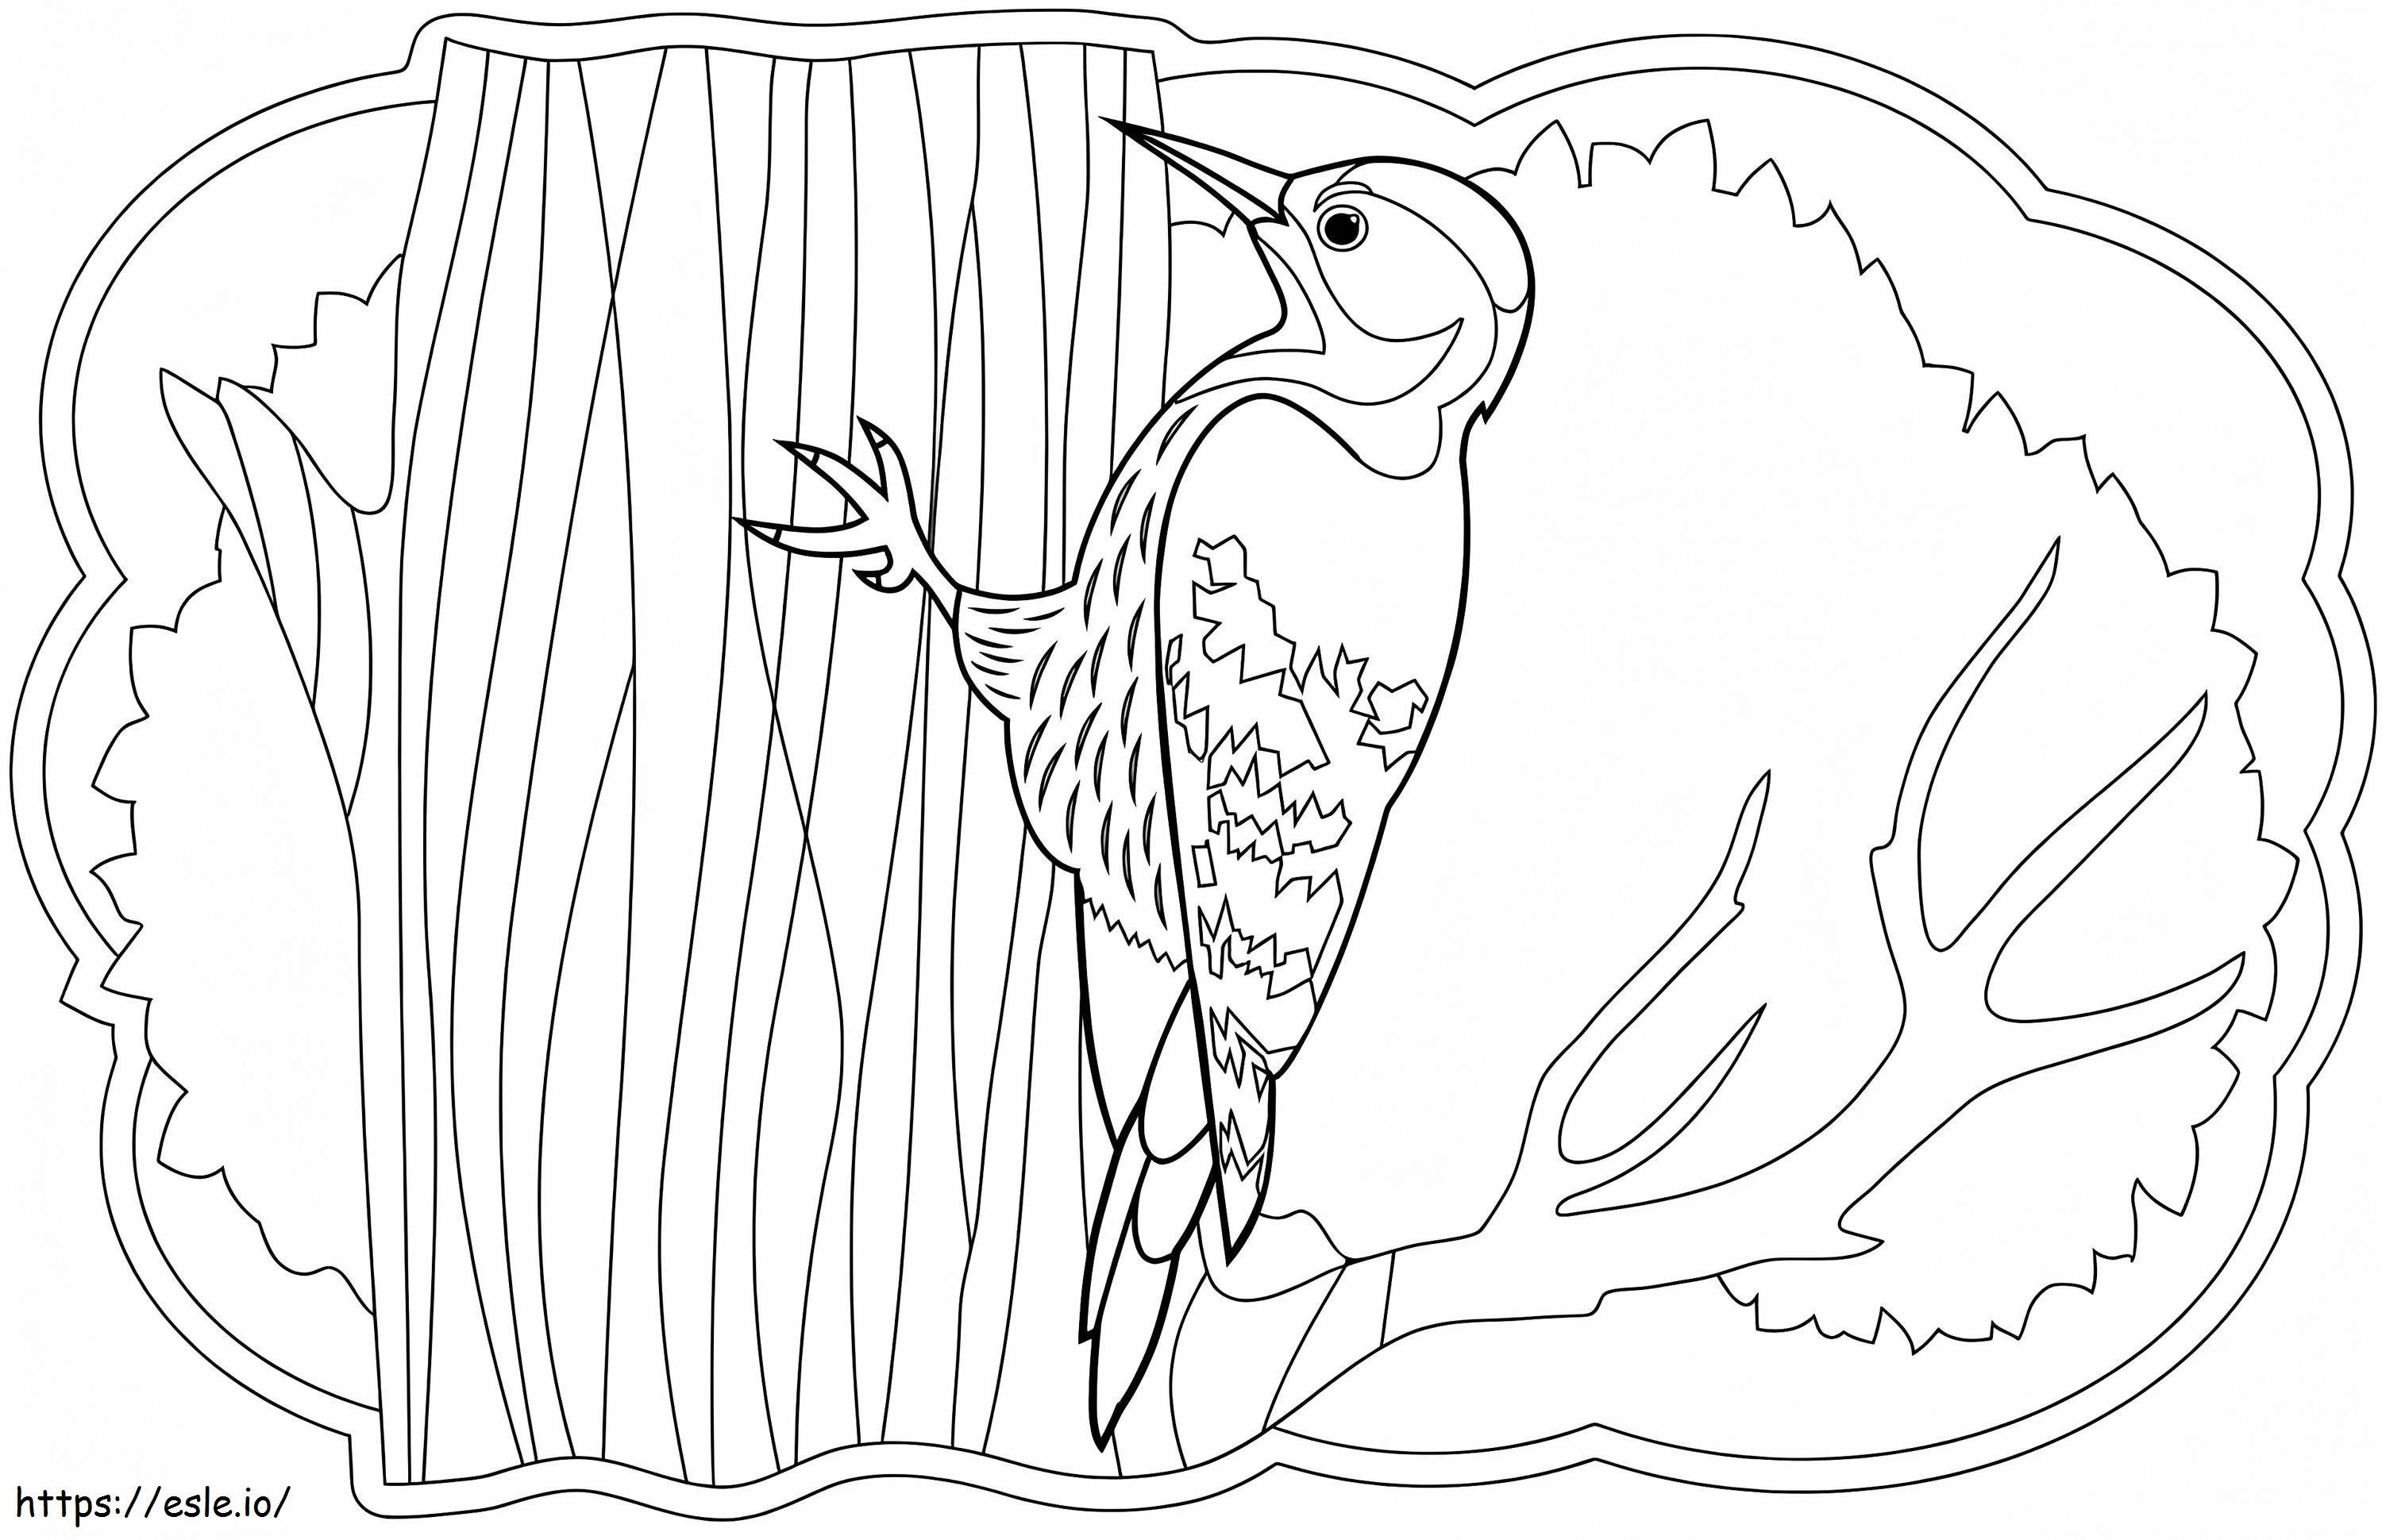 Normal Woodpecker coloring page